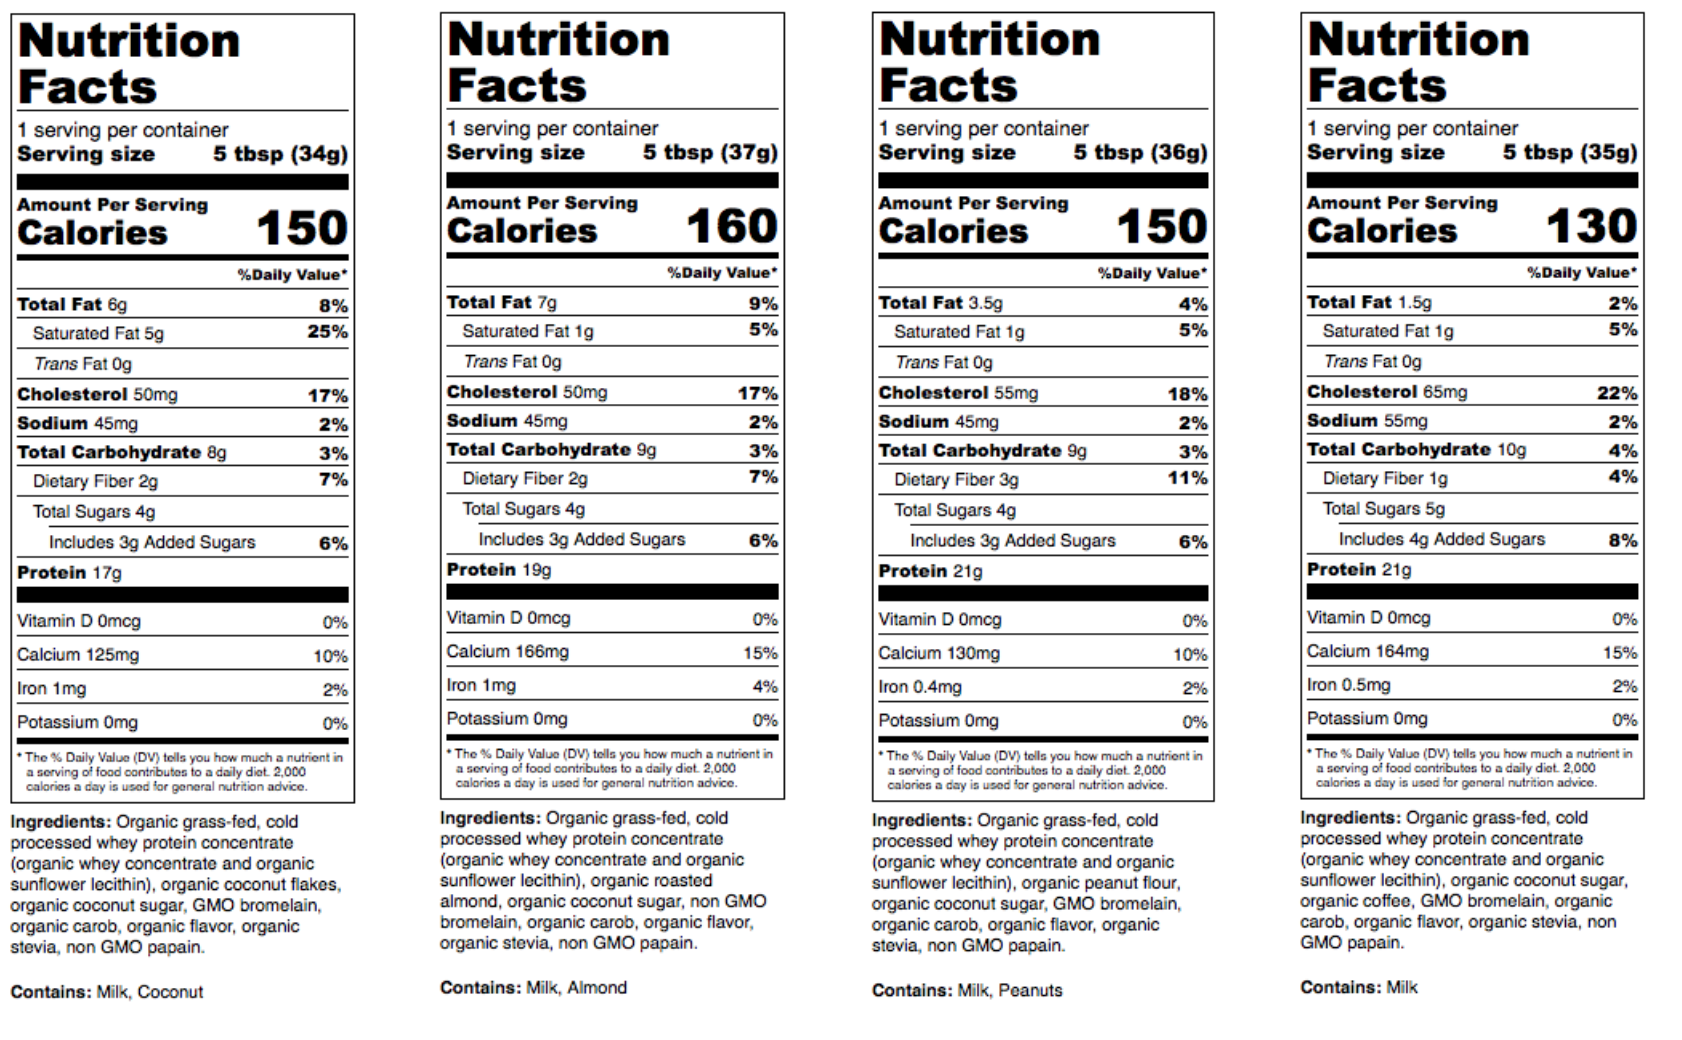 Nutrition Facts - The System.